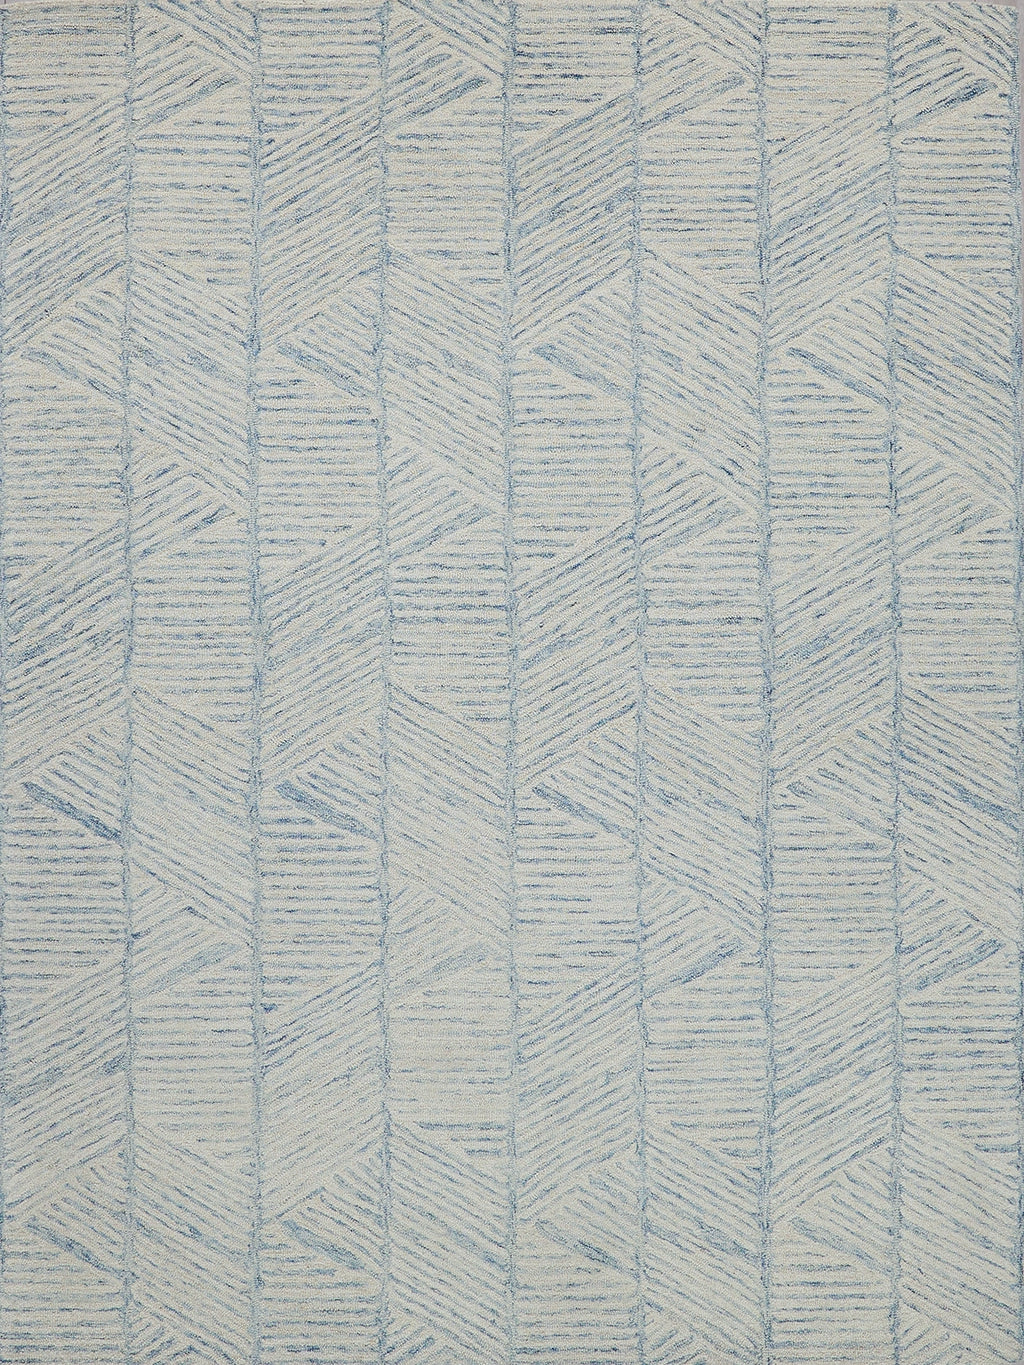 Exquisite Rugs Kascata 6785 Blue/Ivory Area Rug